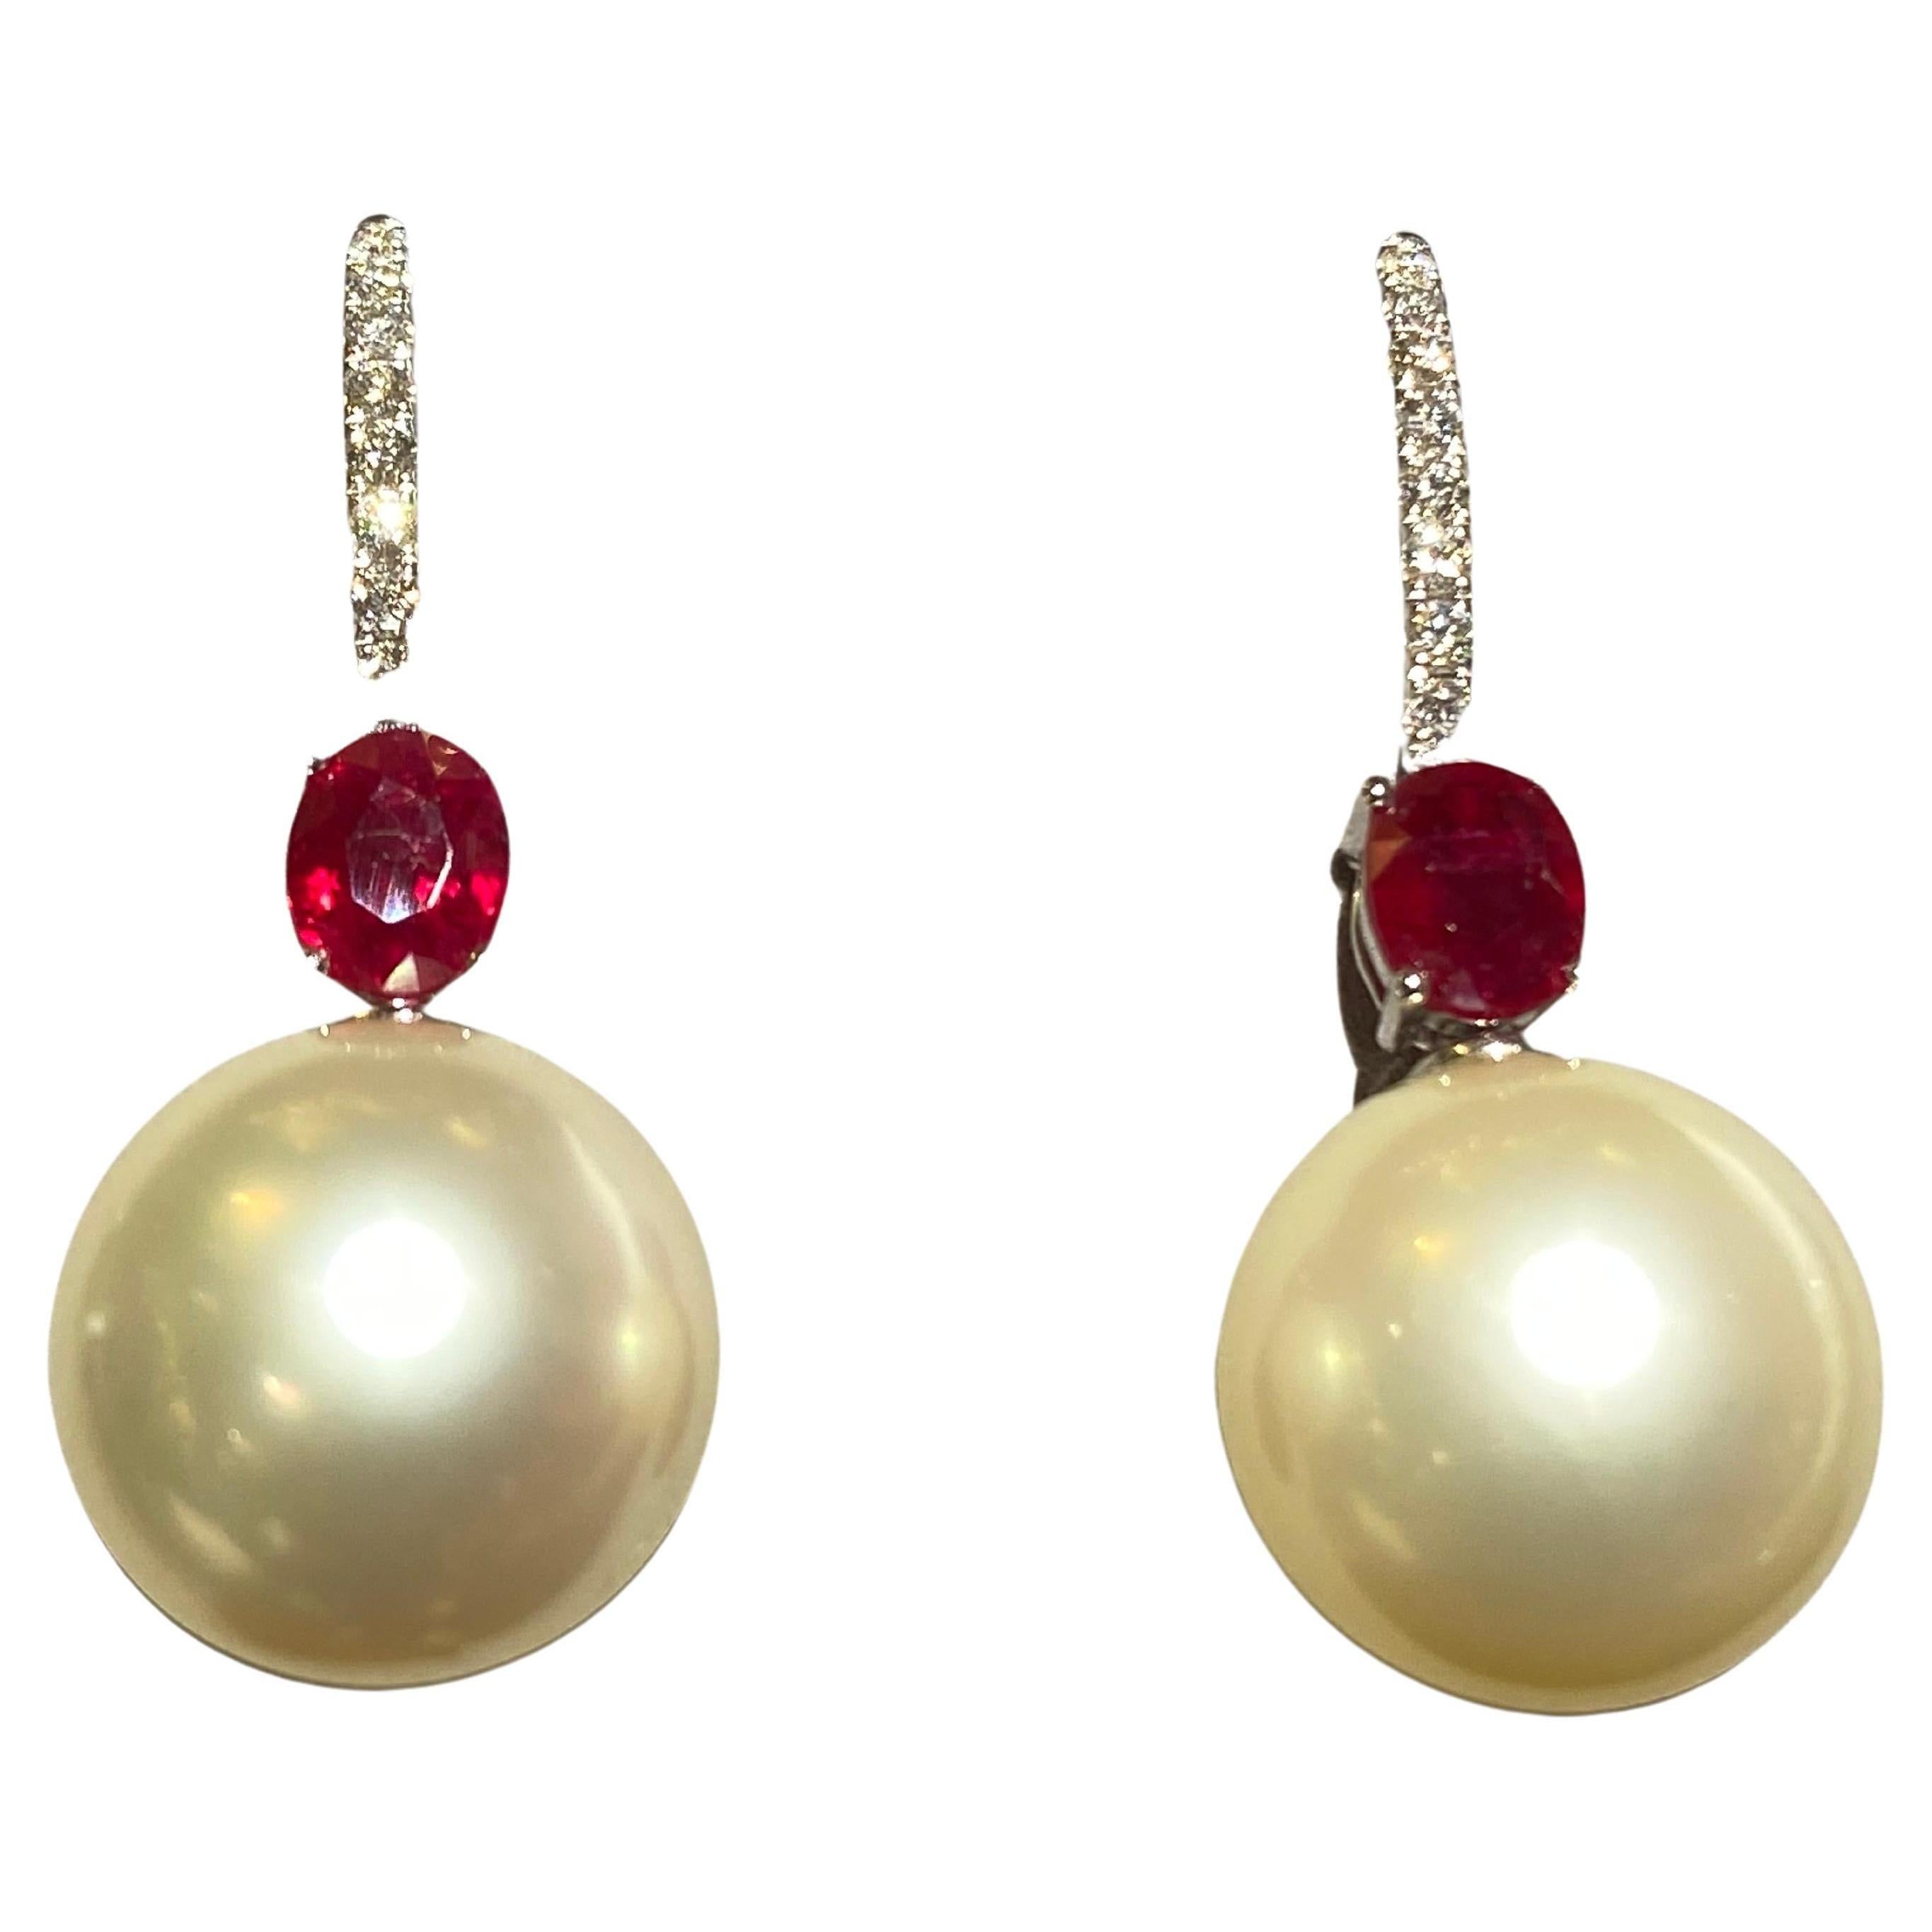 Eostre Ruby, Champagne Colour South Sea Pearl and Diamond Earrings in 18k Gold